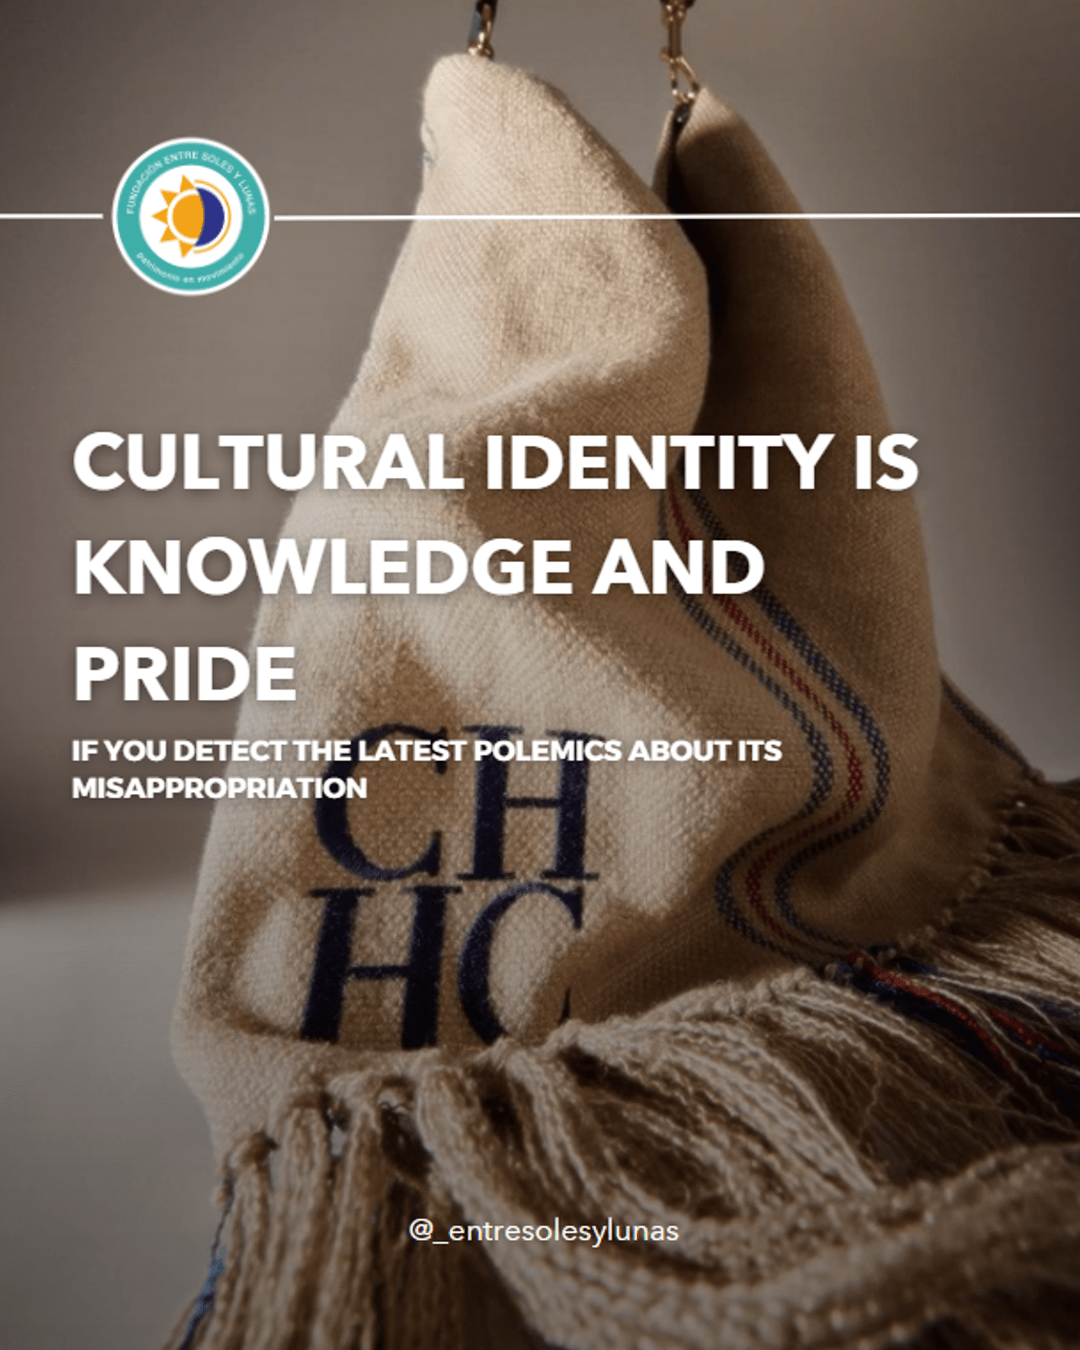 Cultural identity is knowledge and pride: If you detect the latest polemics about its misappropriation